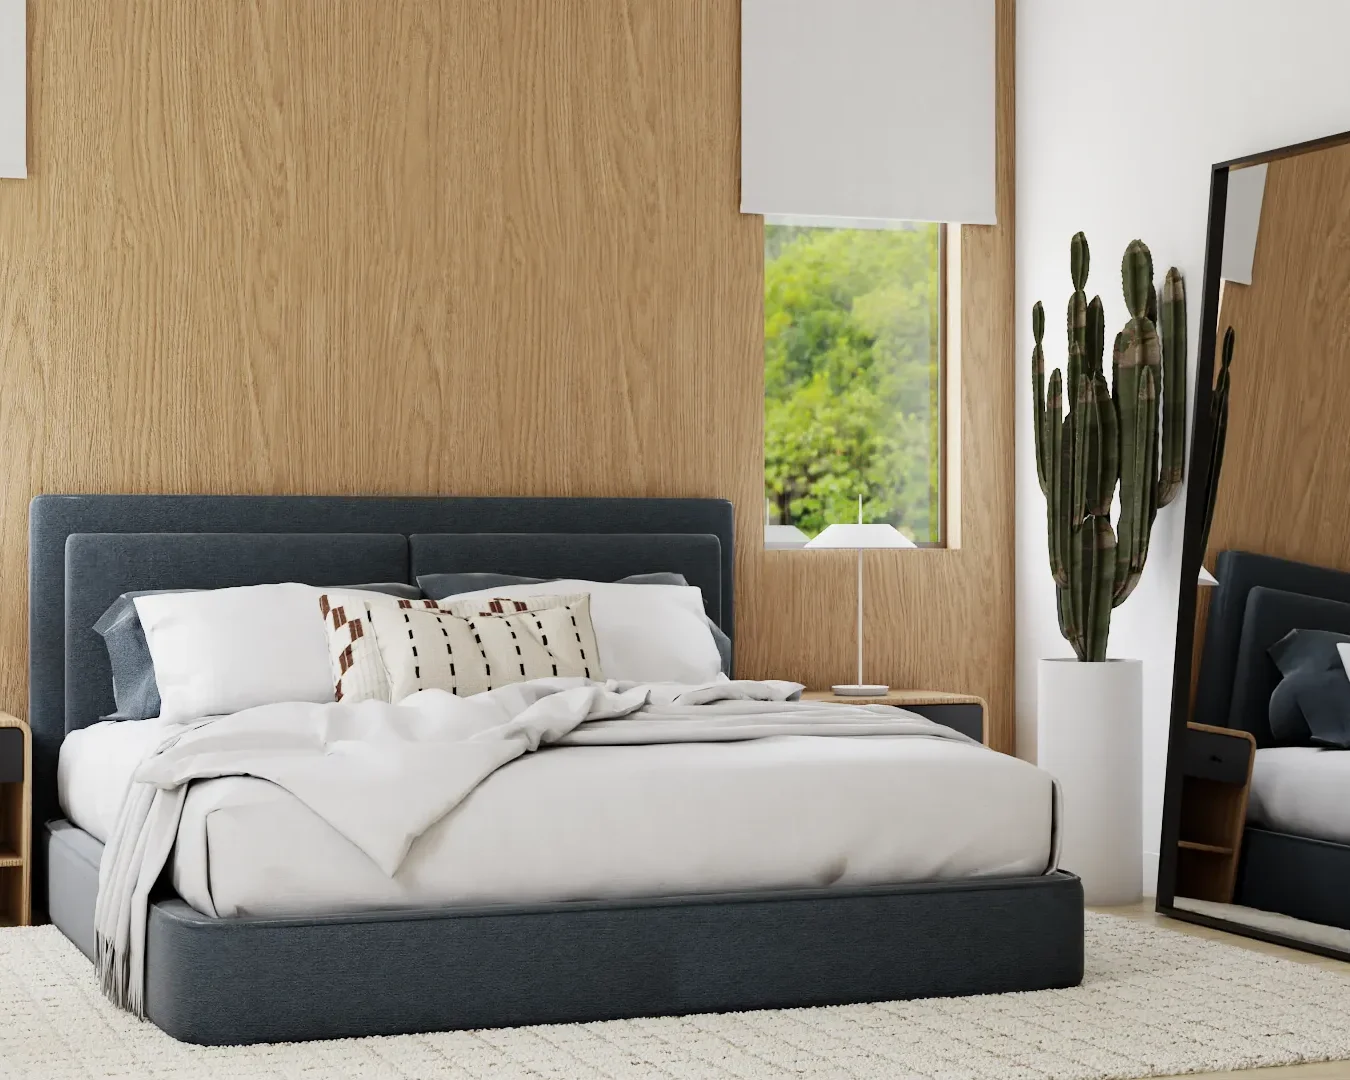 Contemporary bedroom with natural wood wall backdrop, a sleek blue bed, and modern decor, offering a tranquil and stylish sleeping environment. Design by Debora, an online interior design service.